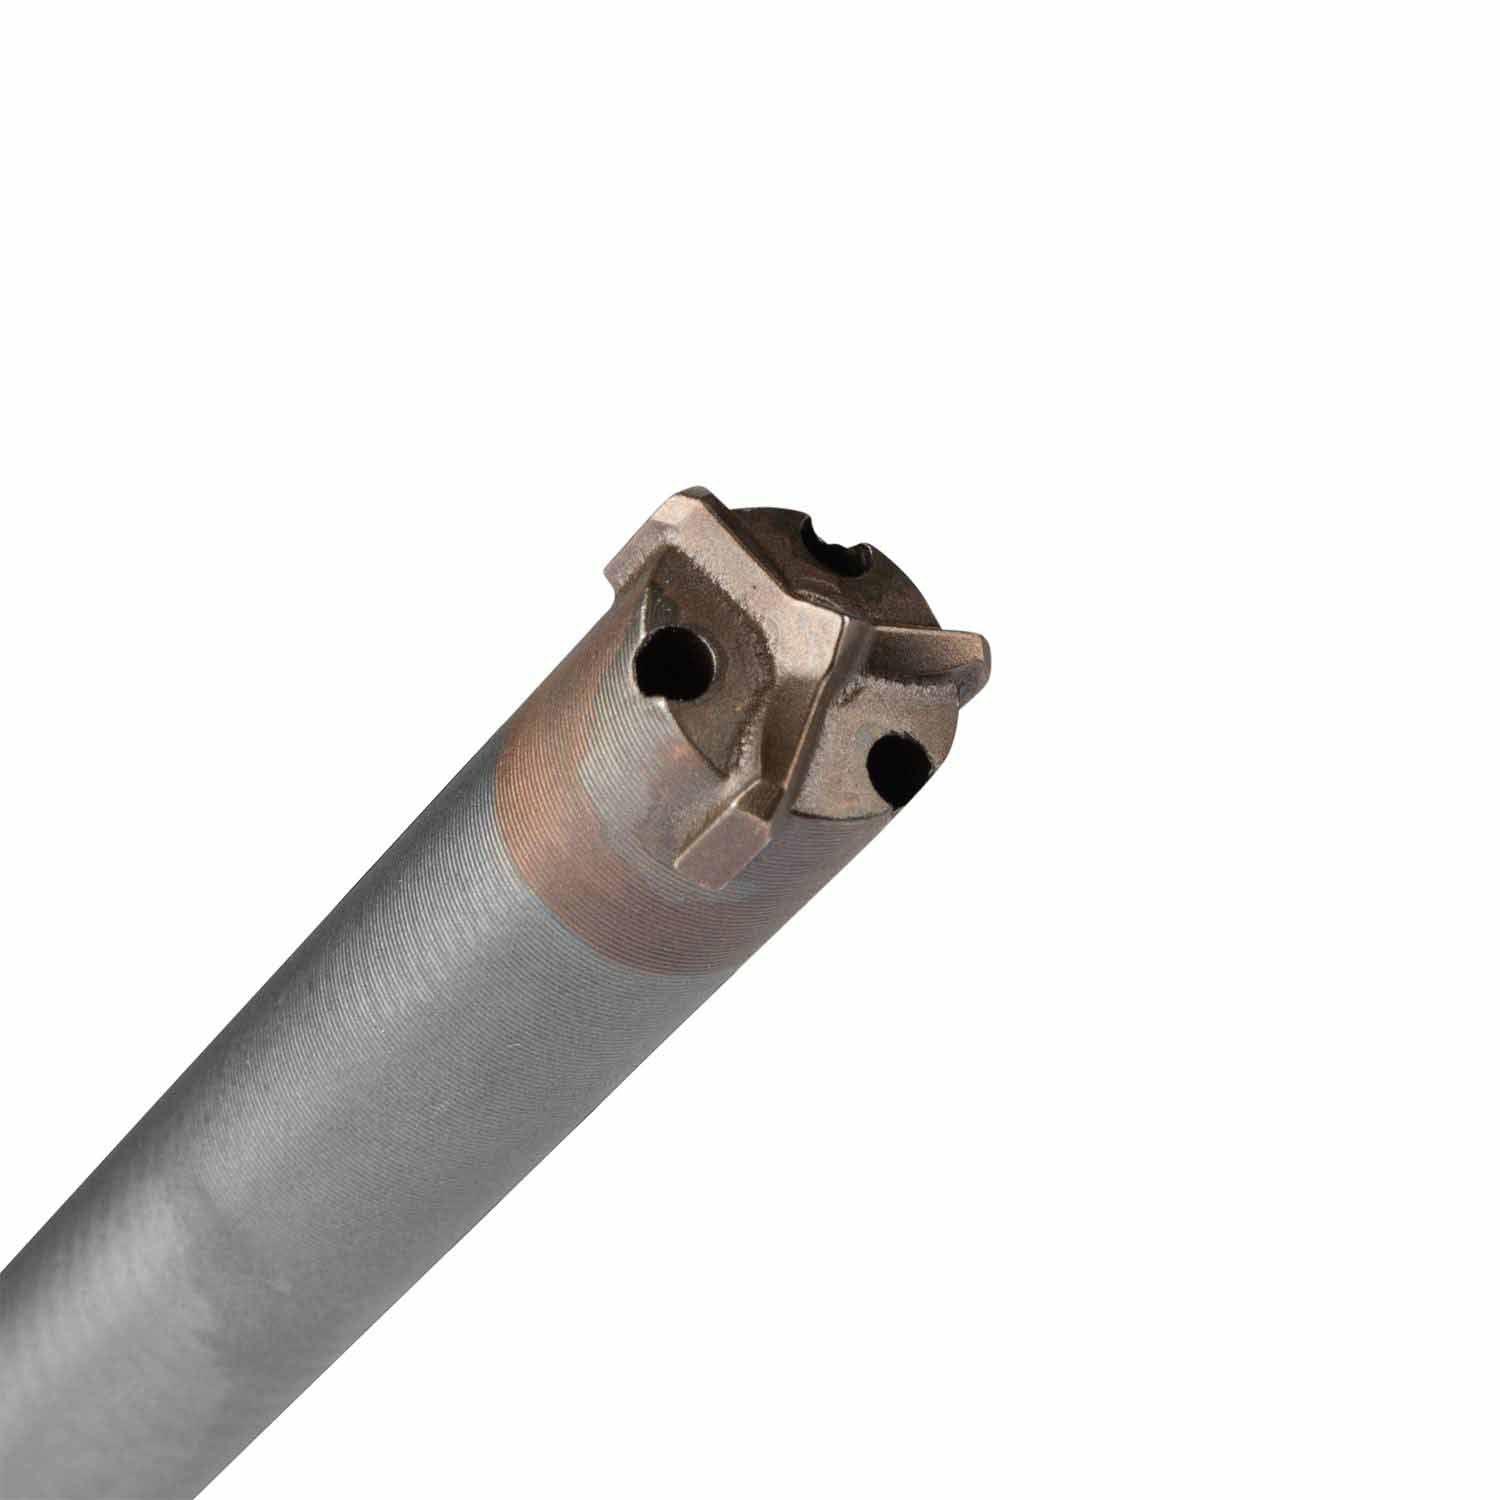 Makita E-07163 5/8" x 16" SDS-Plus Hollow Dust Extraction Drill Bit